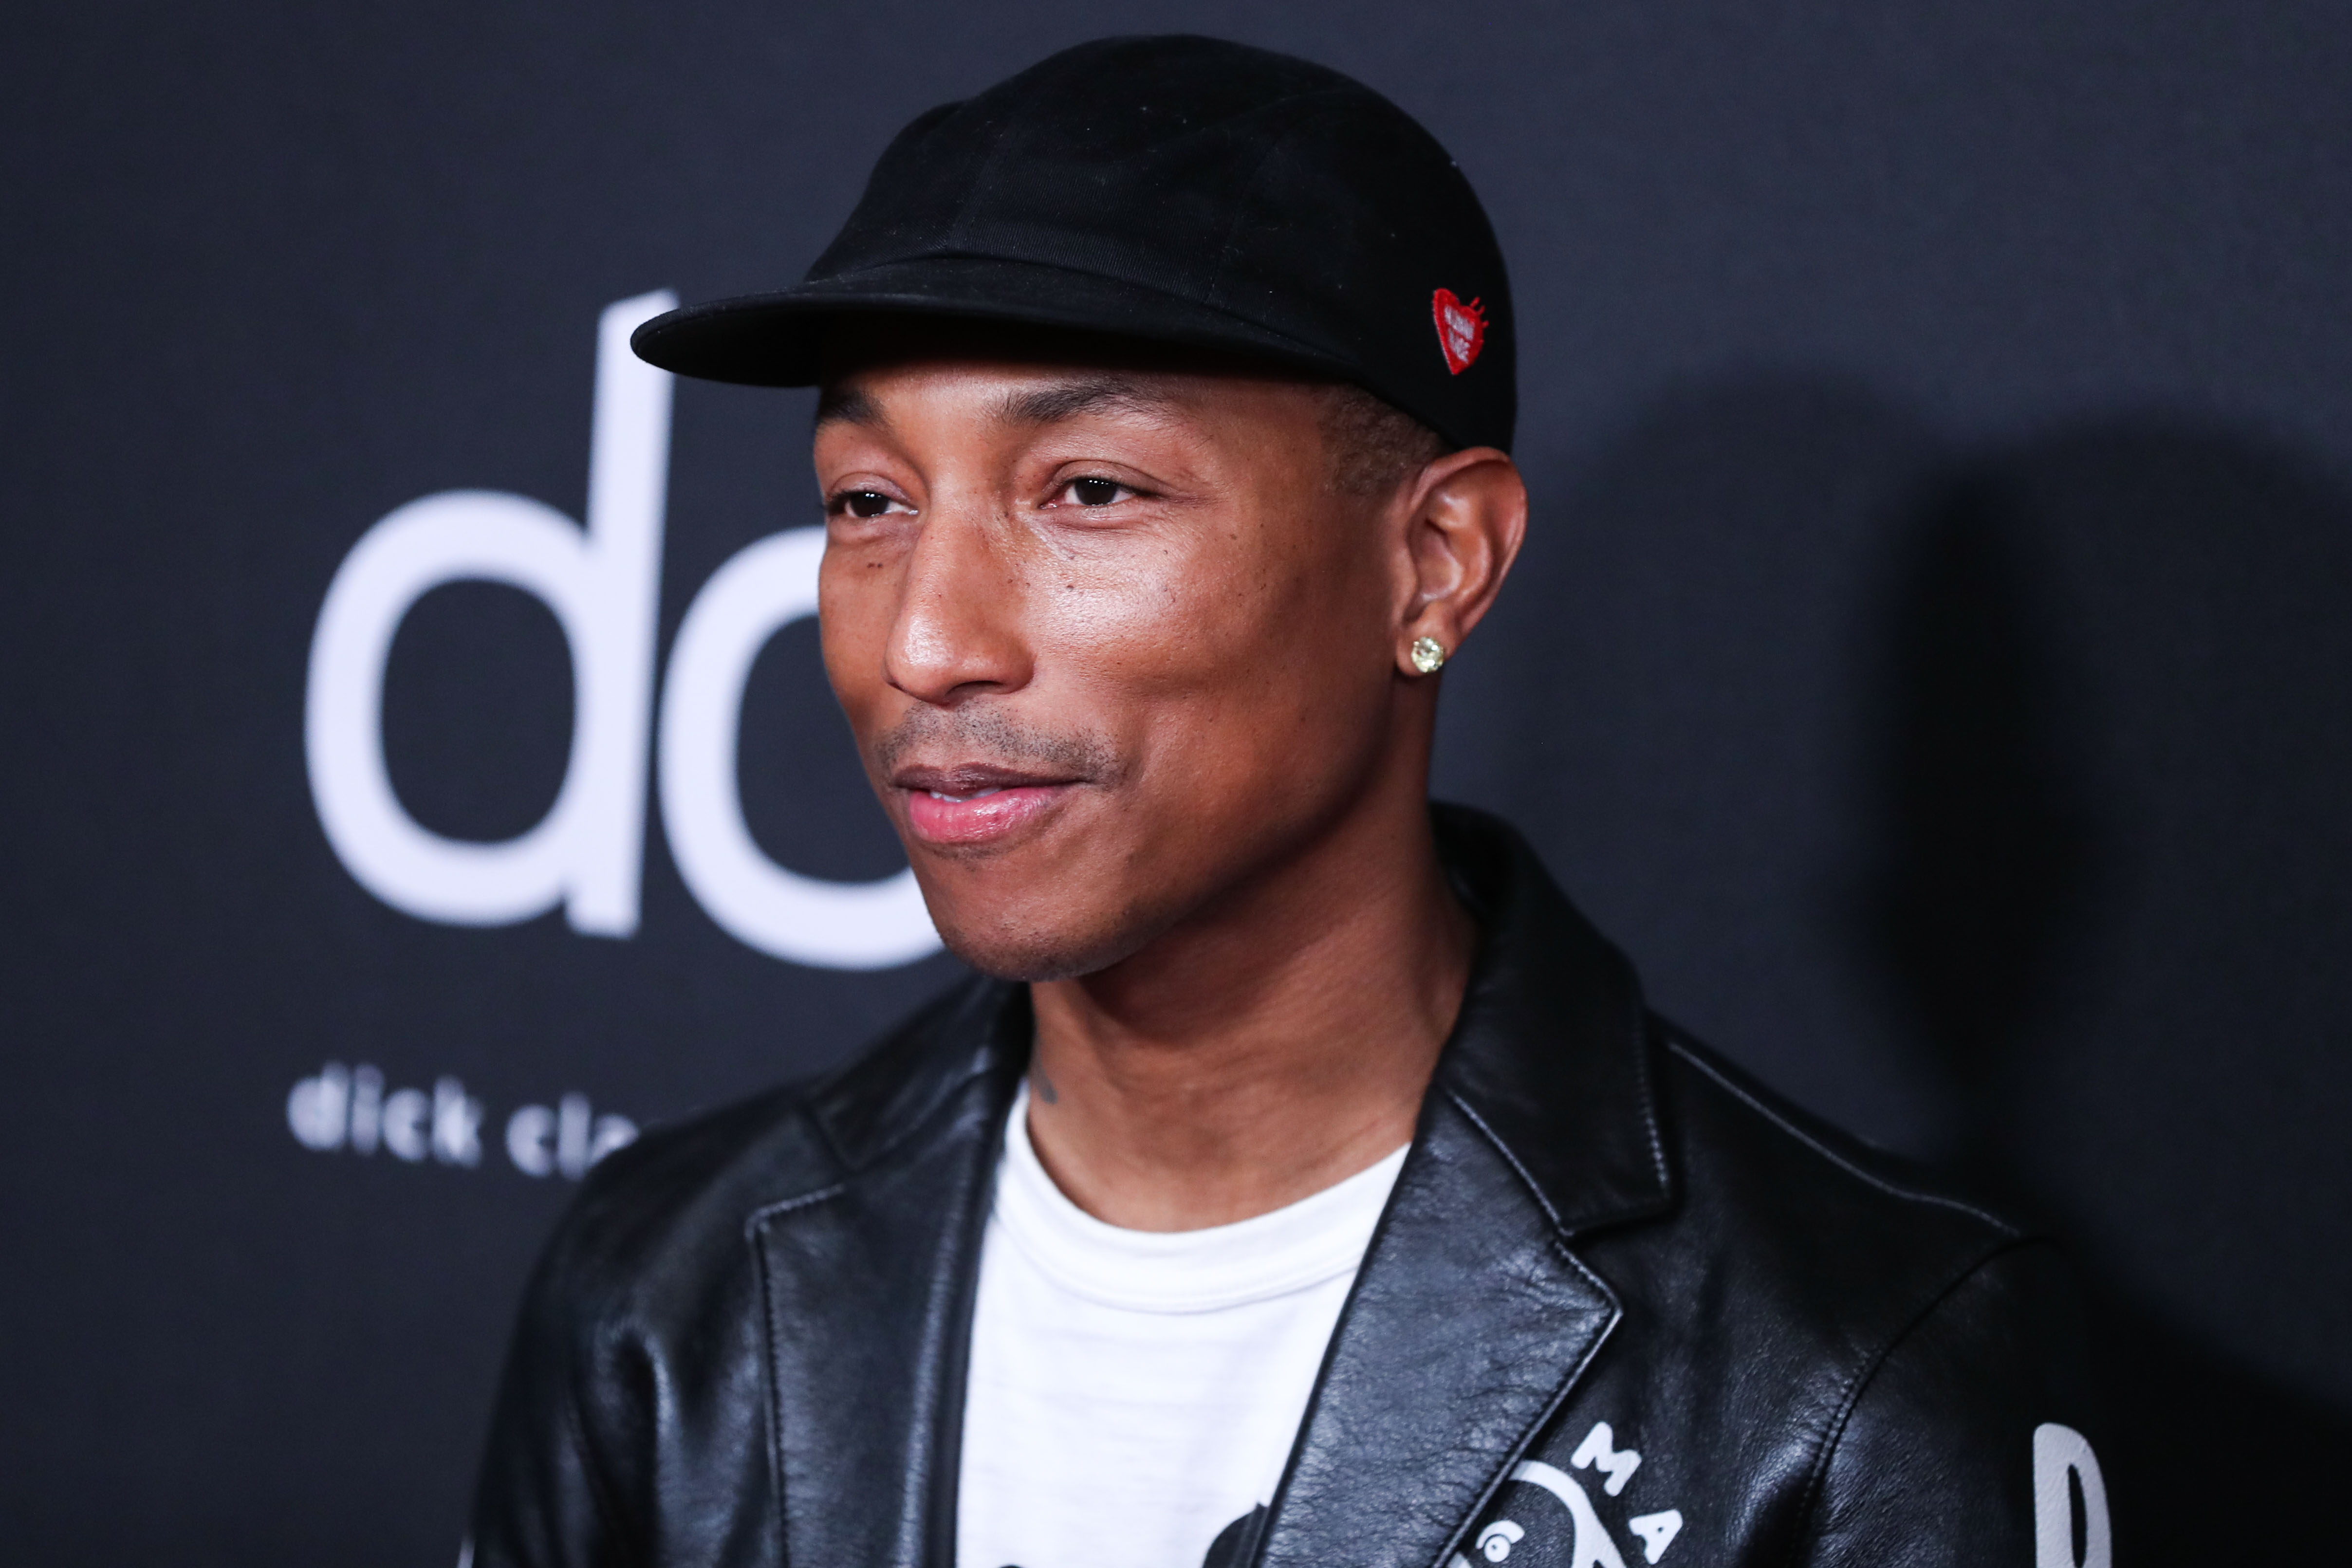 Singer Pharrell Williams arrives at the 23rd Annual Hollywood Film Awards held at The Beverly Hilton Hotel on November 3, 2019 in Beverly Hills, Los Angeles, California, United States.